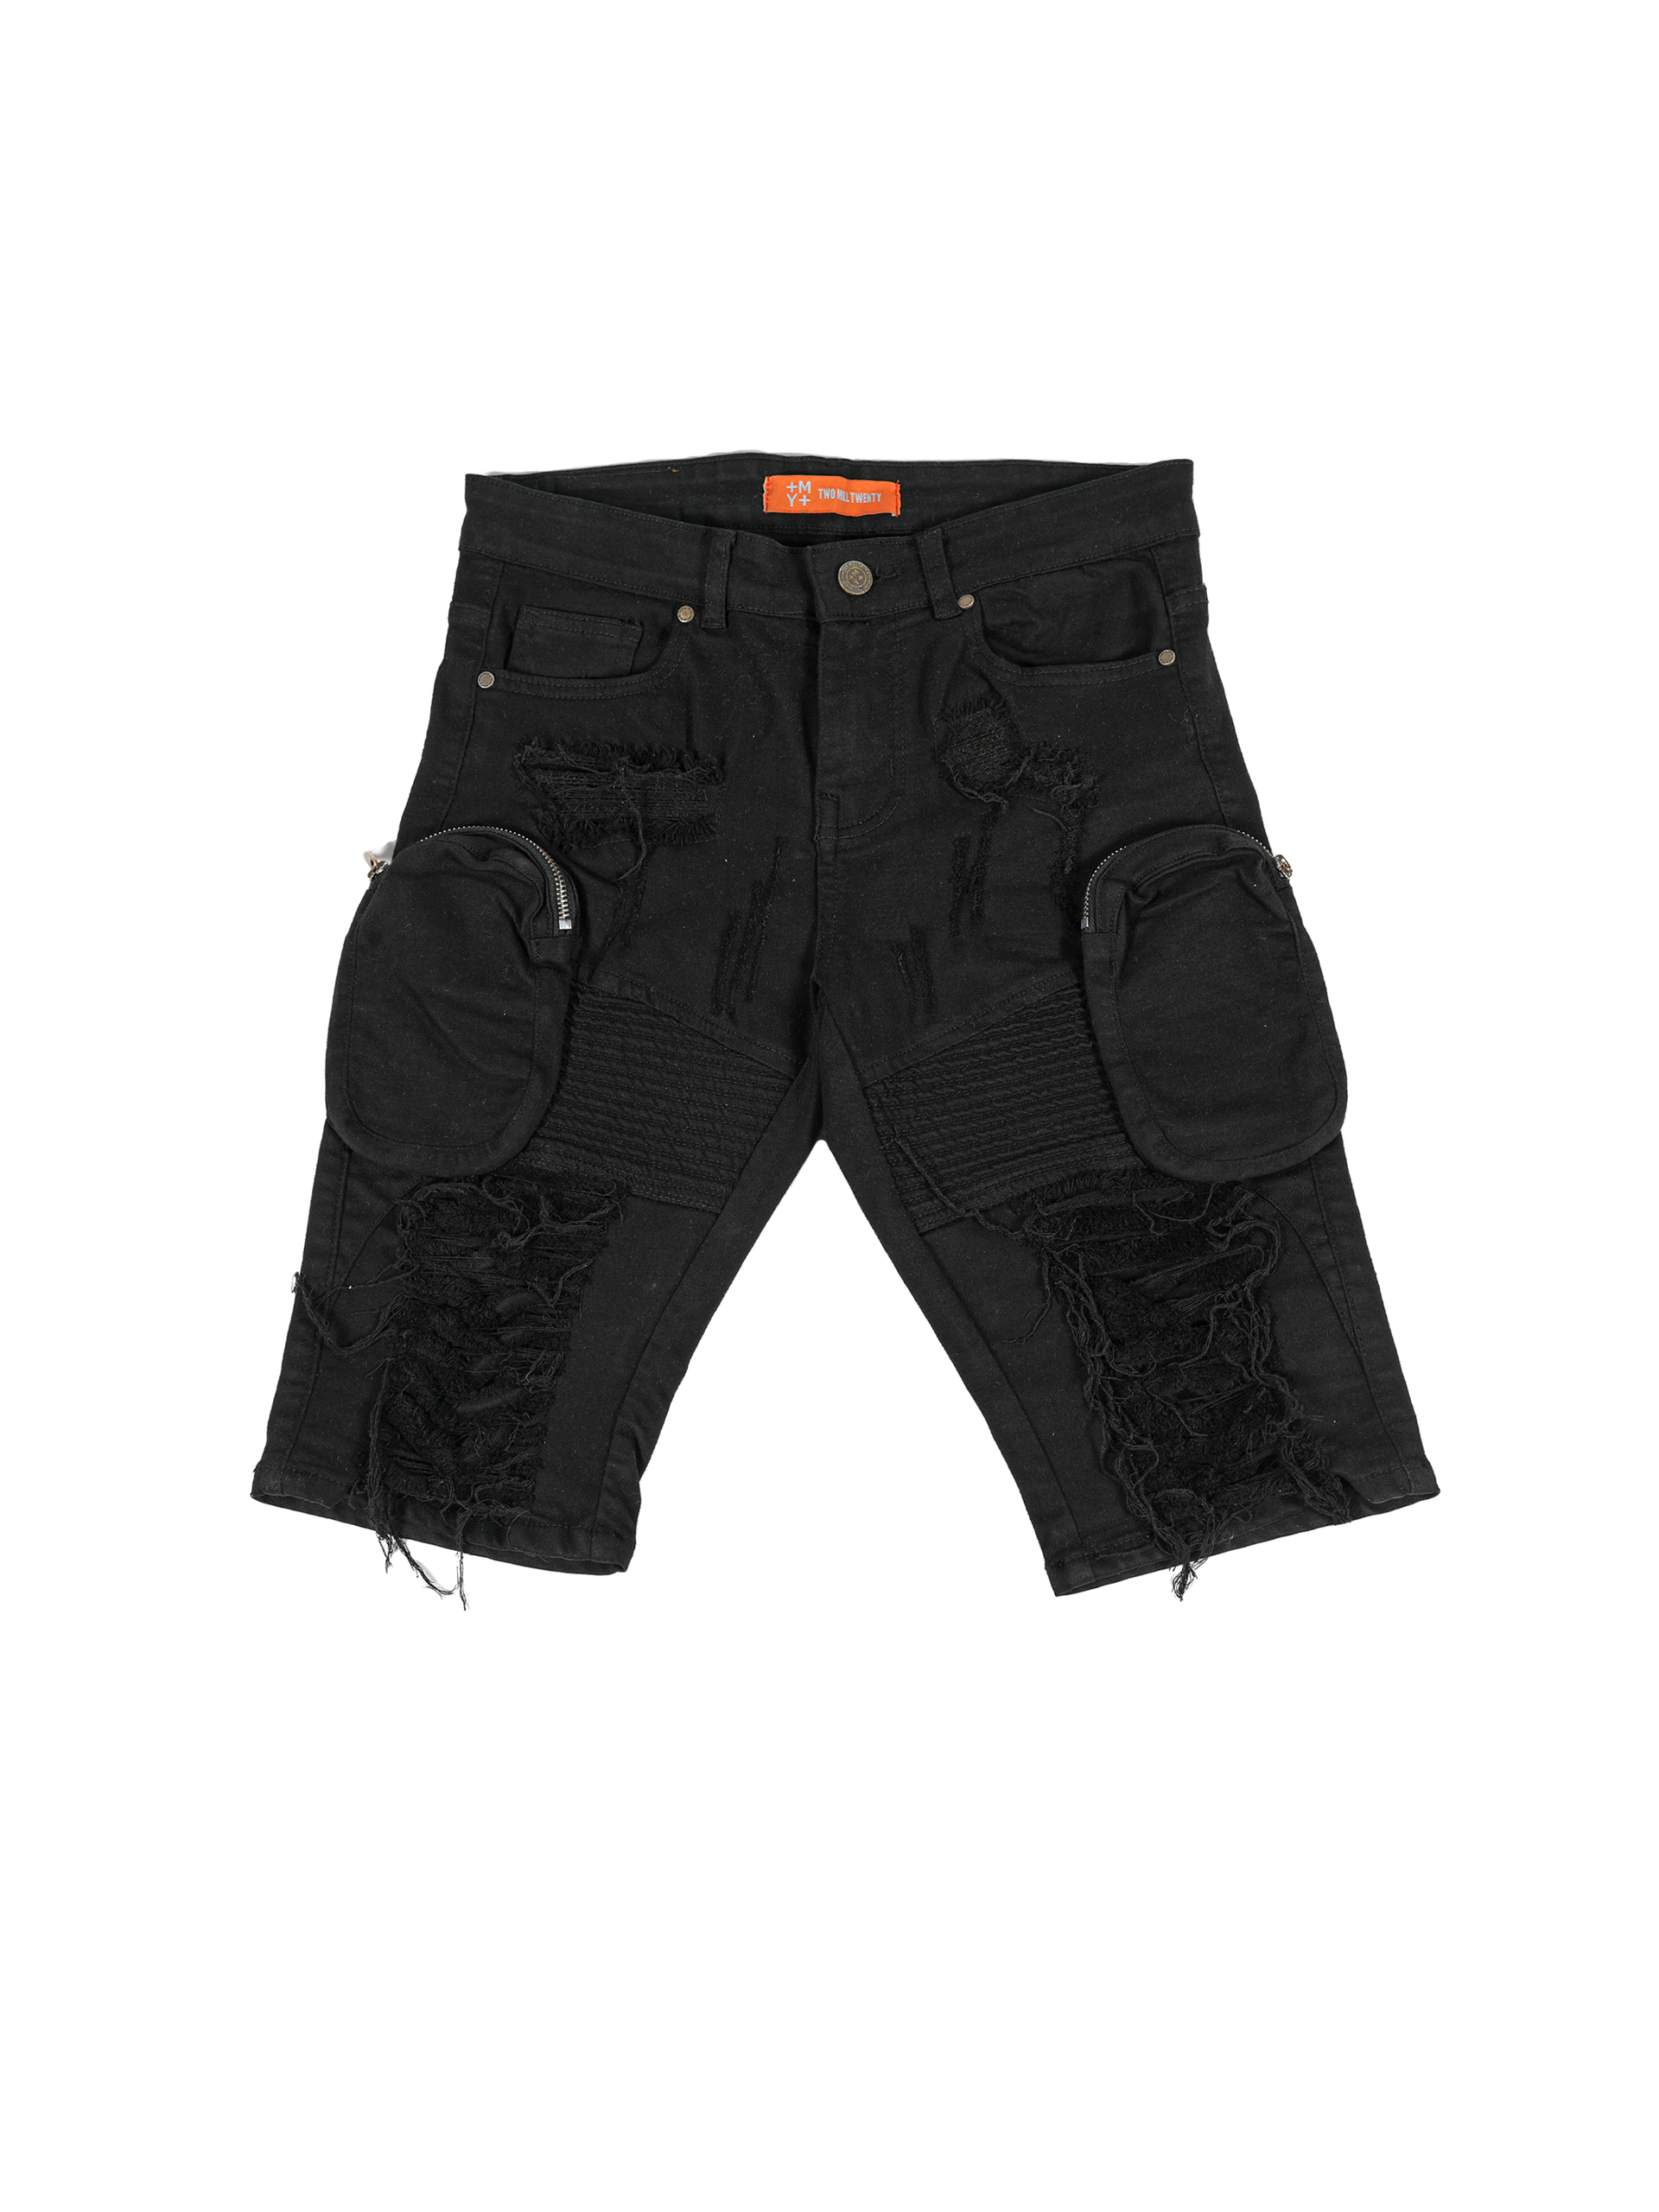 STATE | Men's Slim Fit Frayed Cutoff Destroyed Ripped Distressed Knee Length Denim Jean Shorts with Cargo Pockets in Vintage Black